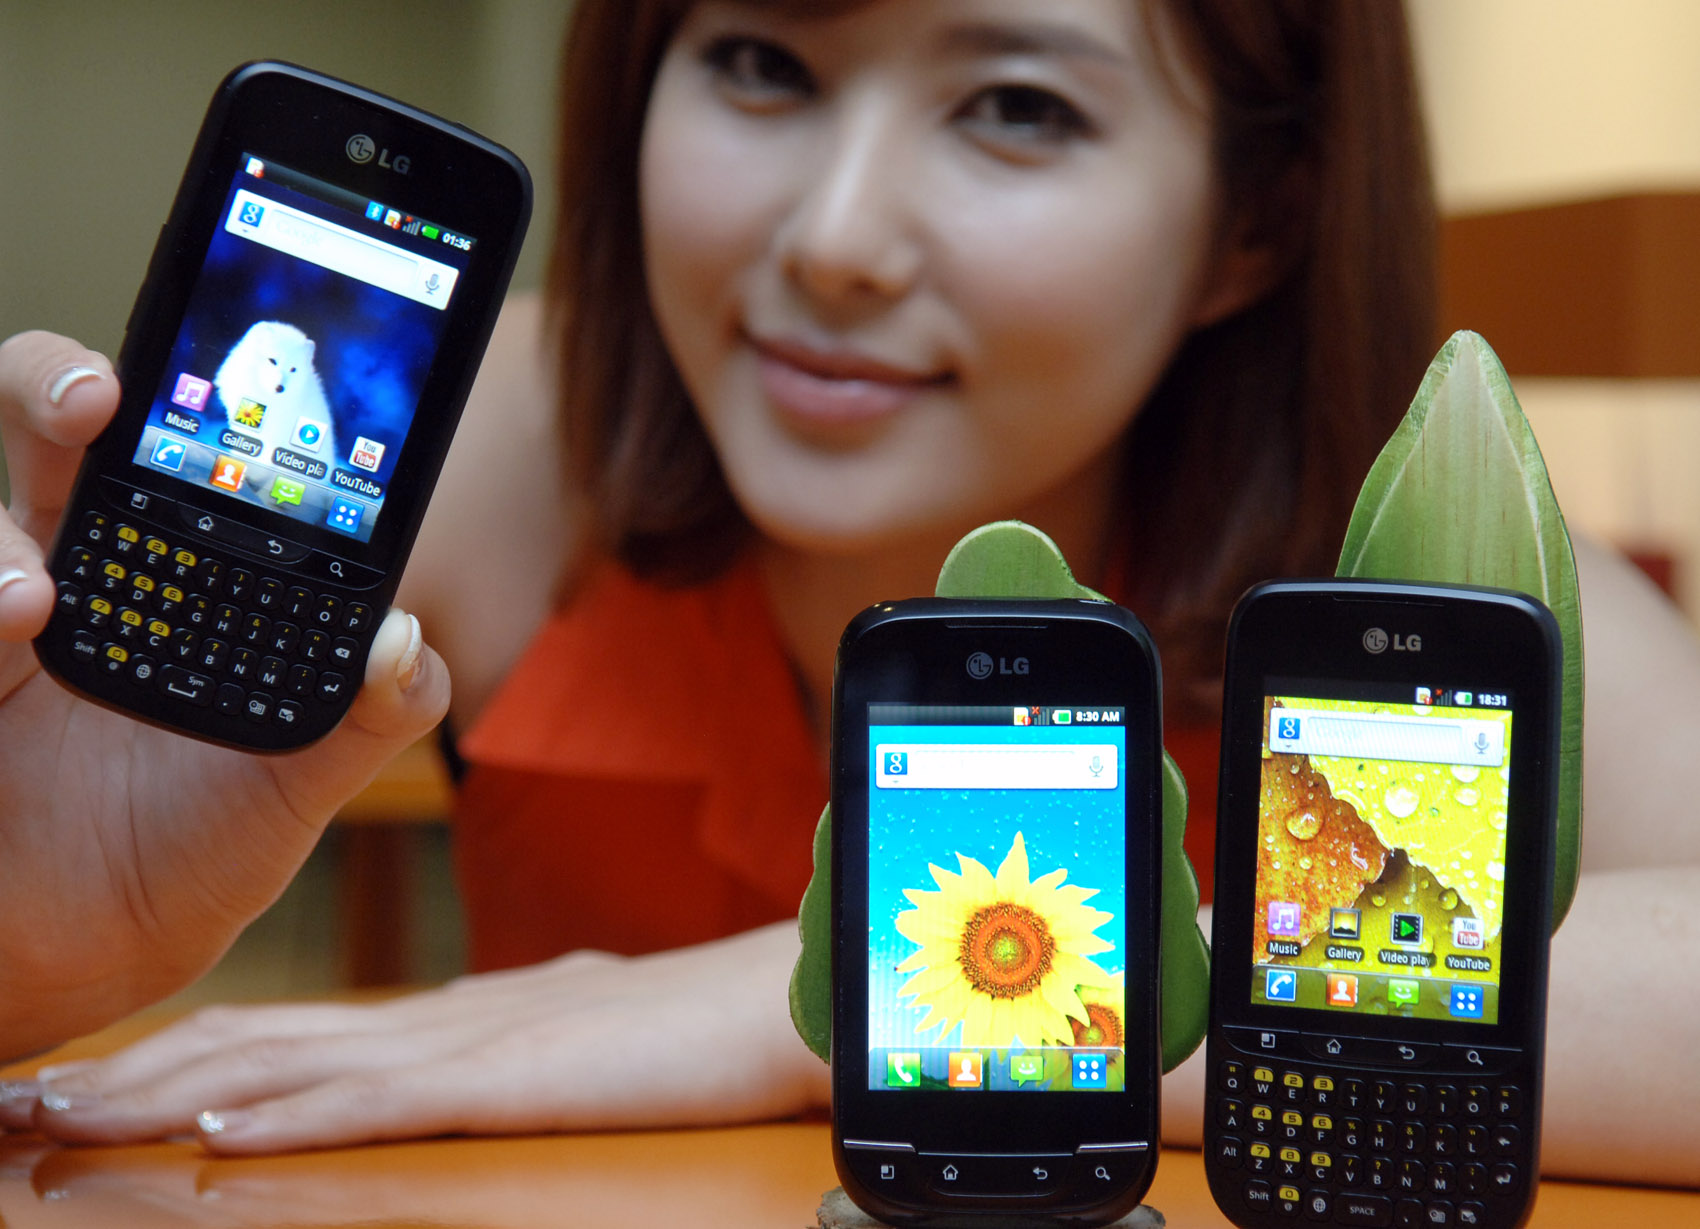 A model holds up LG Optimus Pro and shows its front view while LG Optimus Pro and LG Optimus Net are displayed in front of her